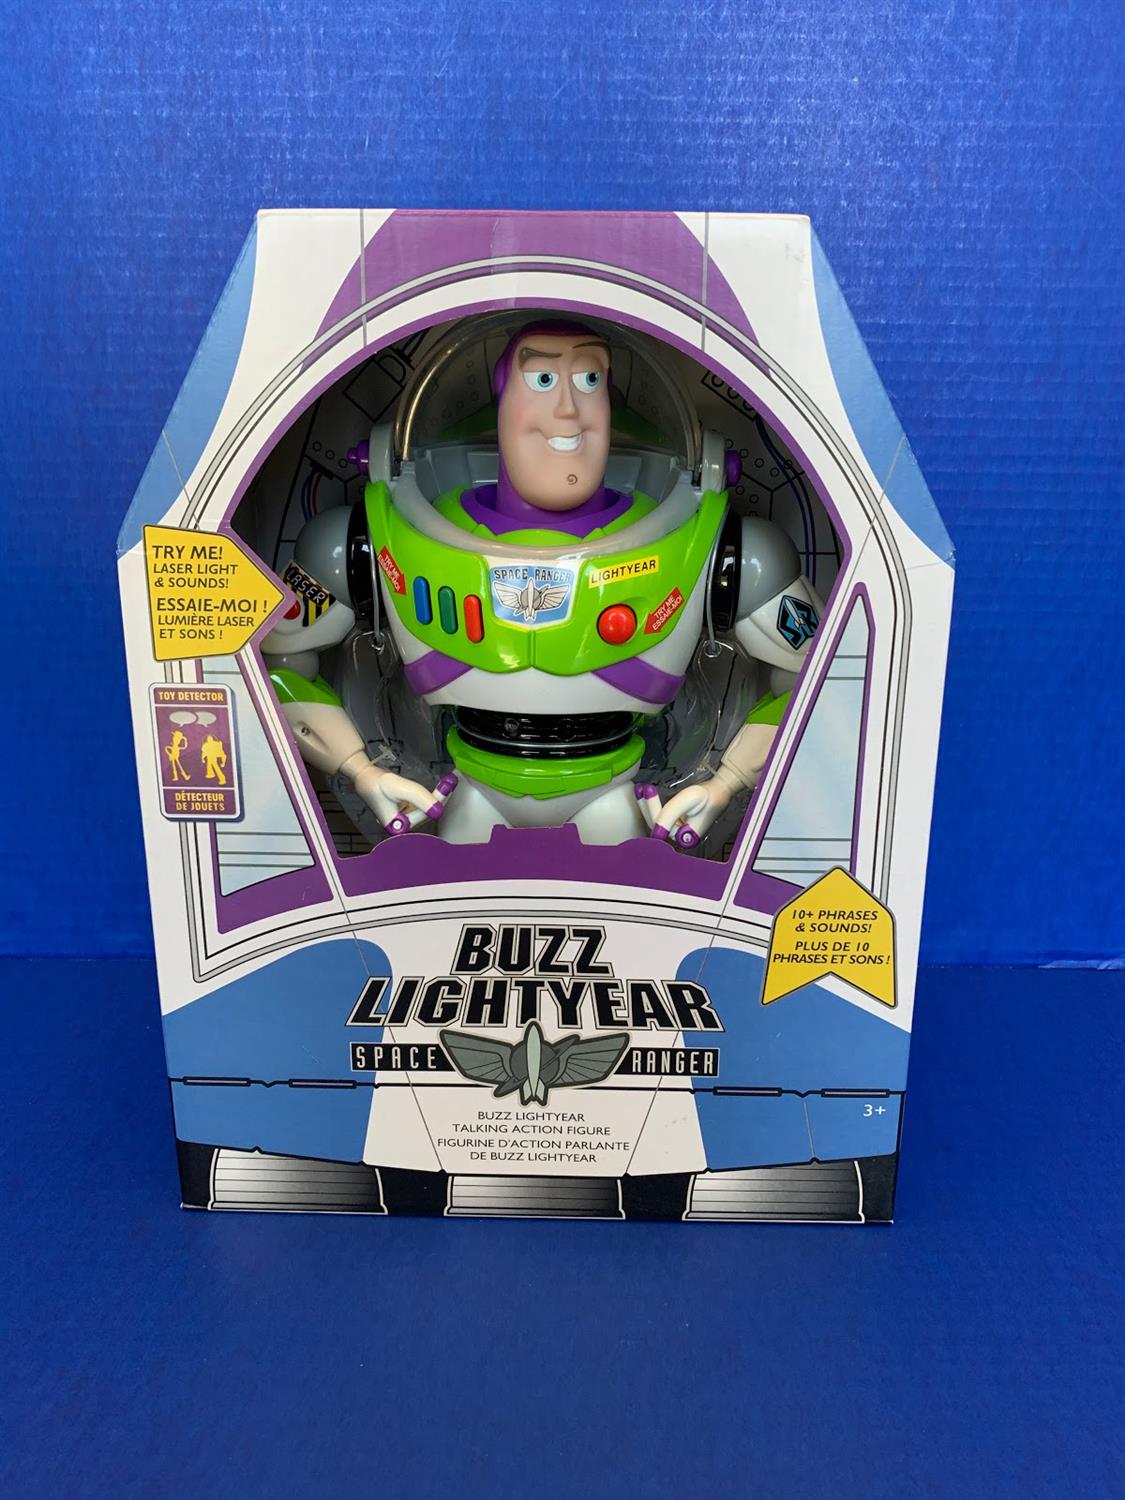 Toy Review: Toy Story 4 Interactive Talking Action Figures from